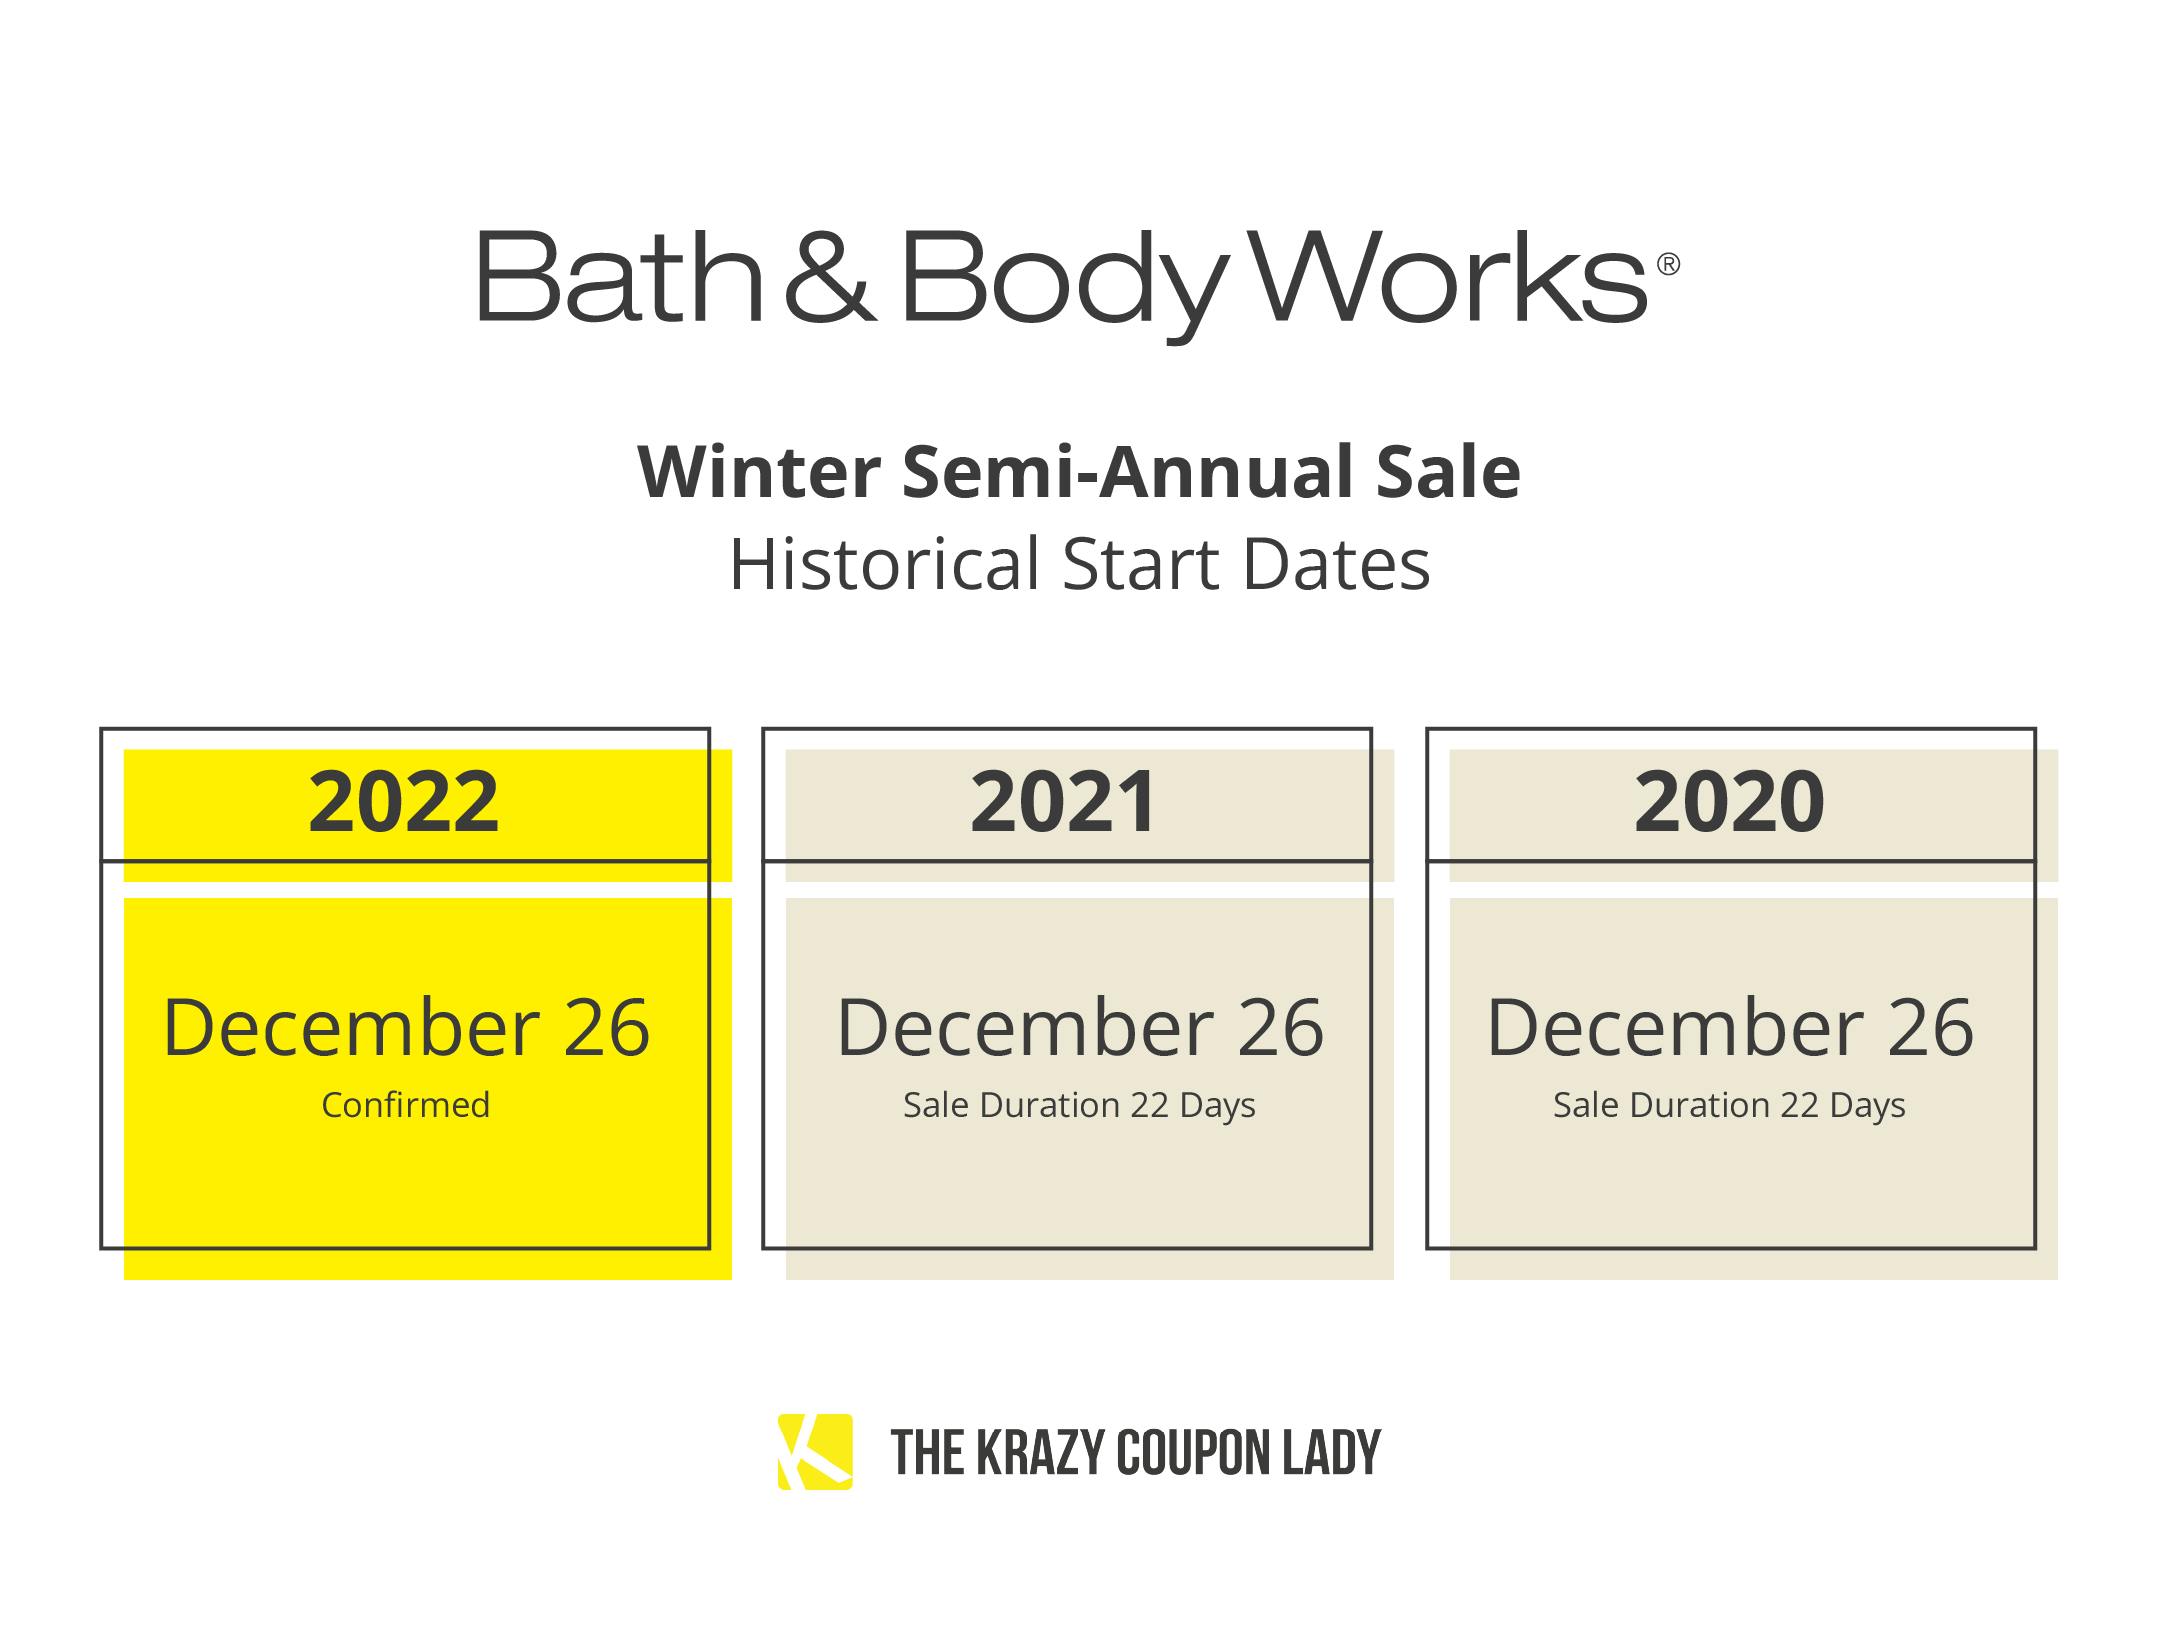 The start dates for the Bath & Body Works Semi-Annual sale on Dec. 26.